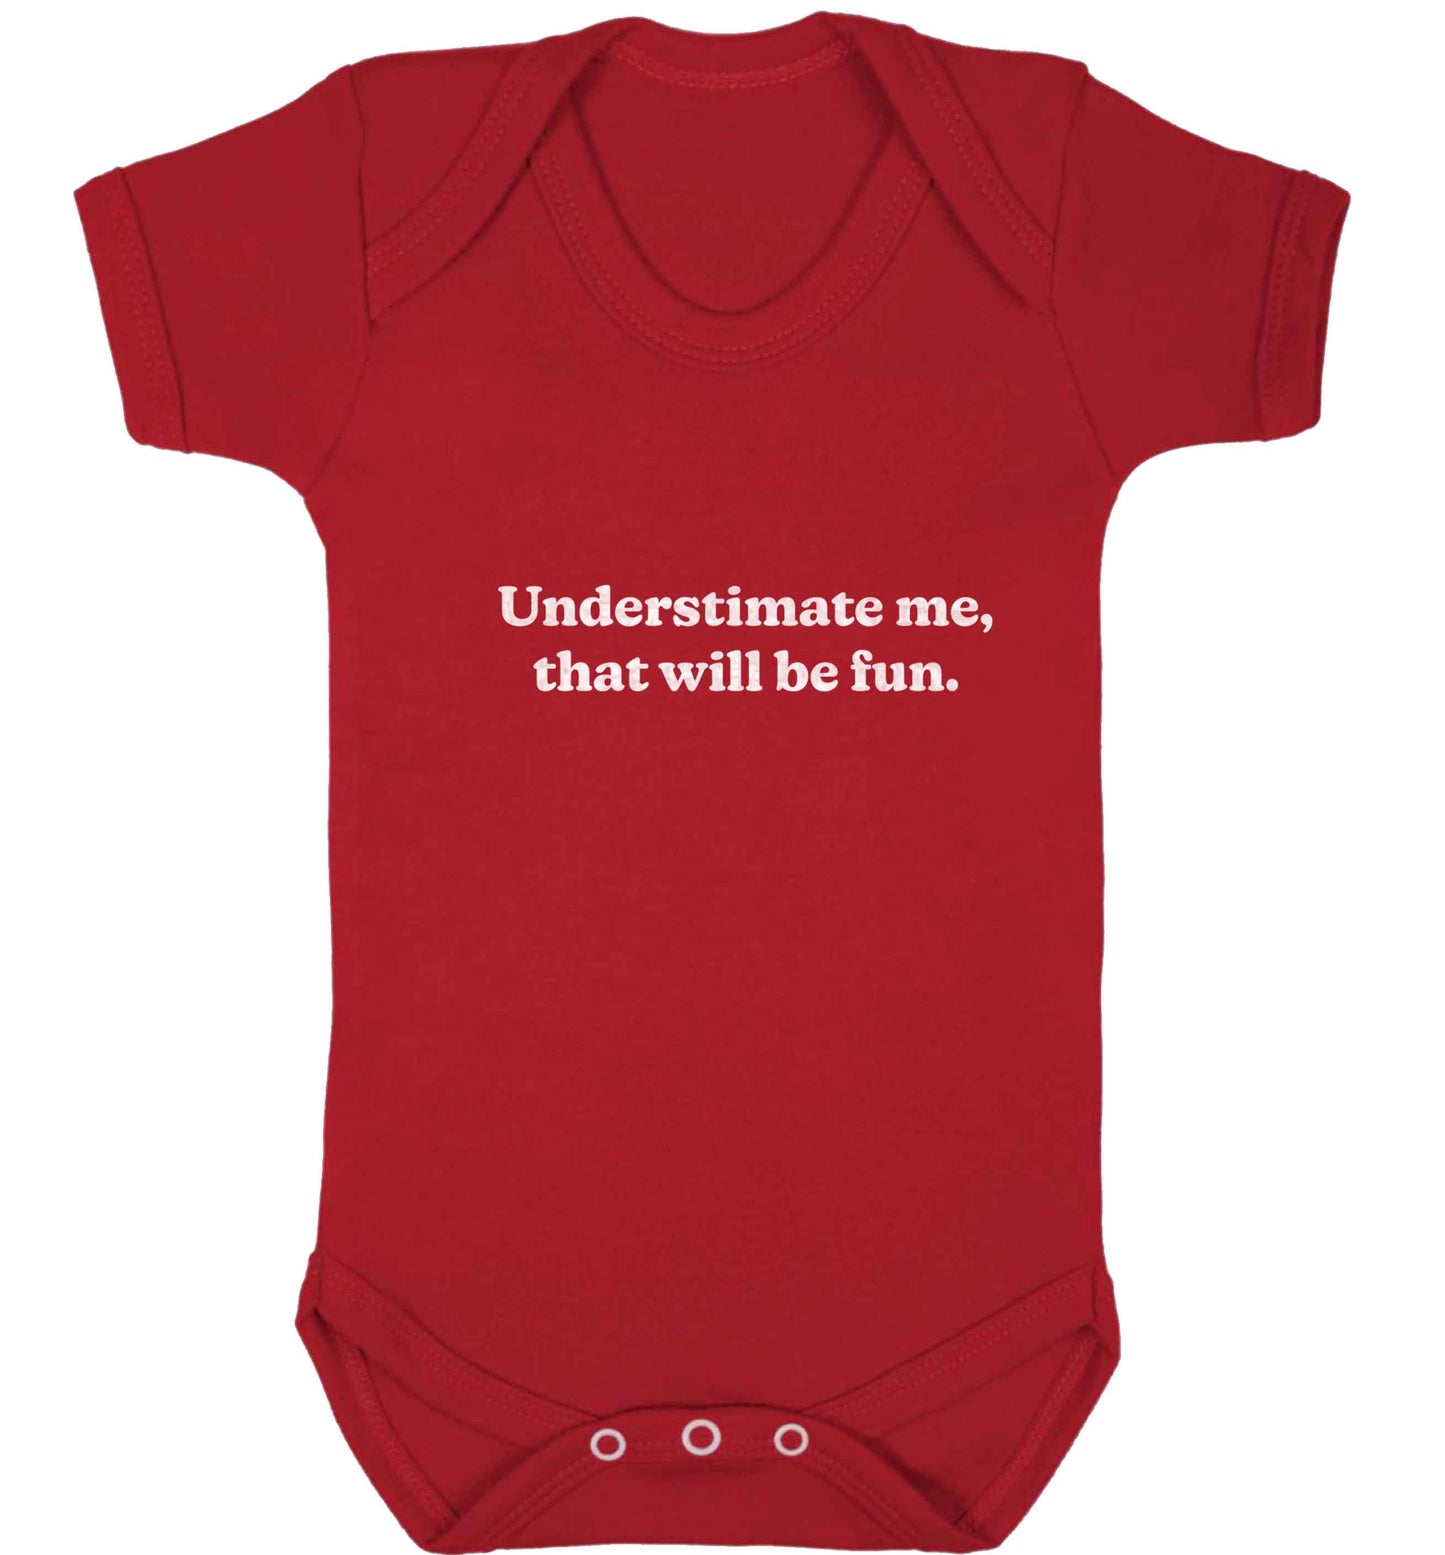 Underestimate me that will be fun baby vest red 18-24 months